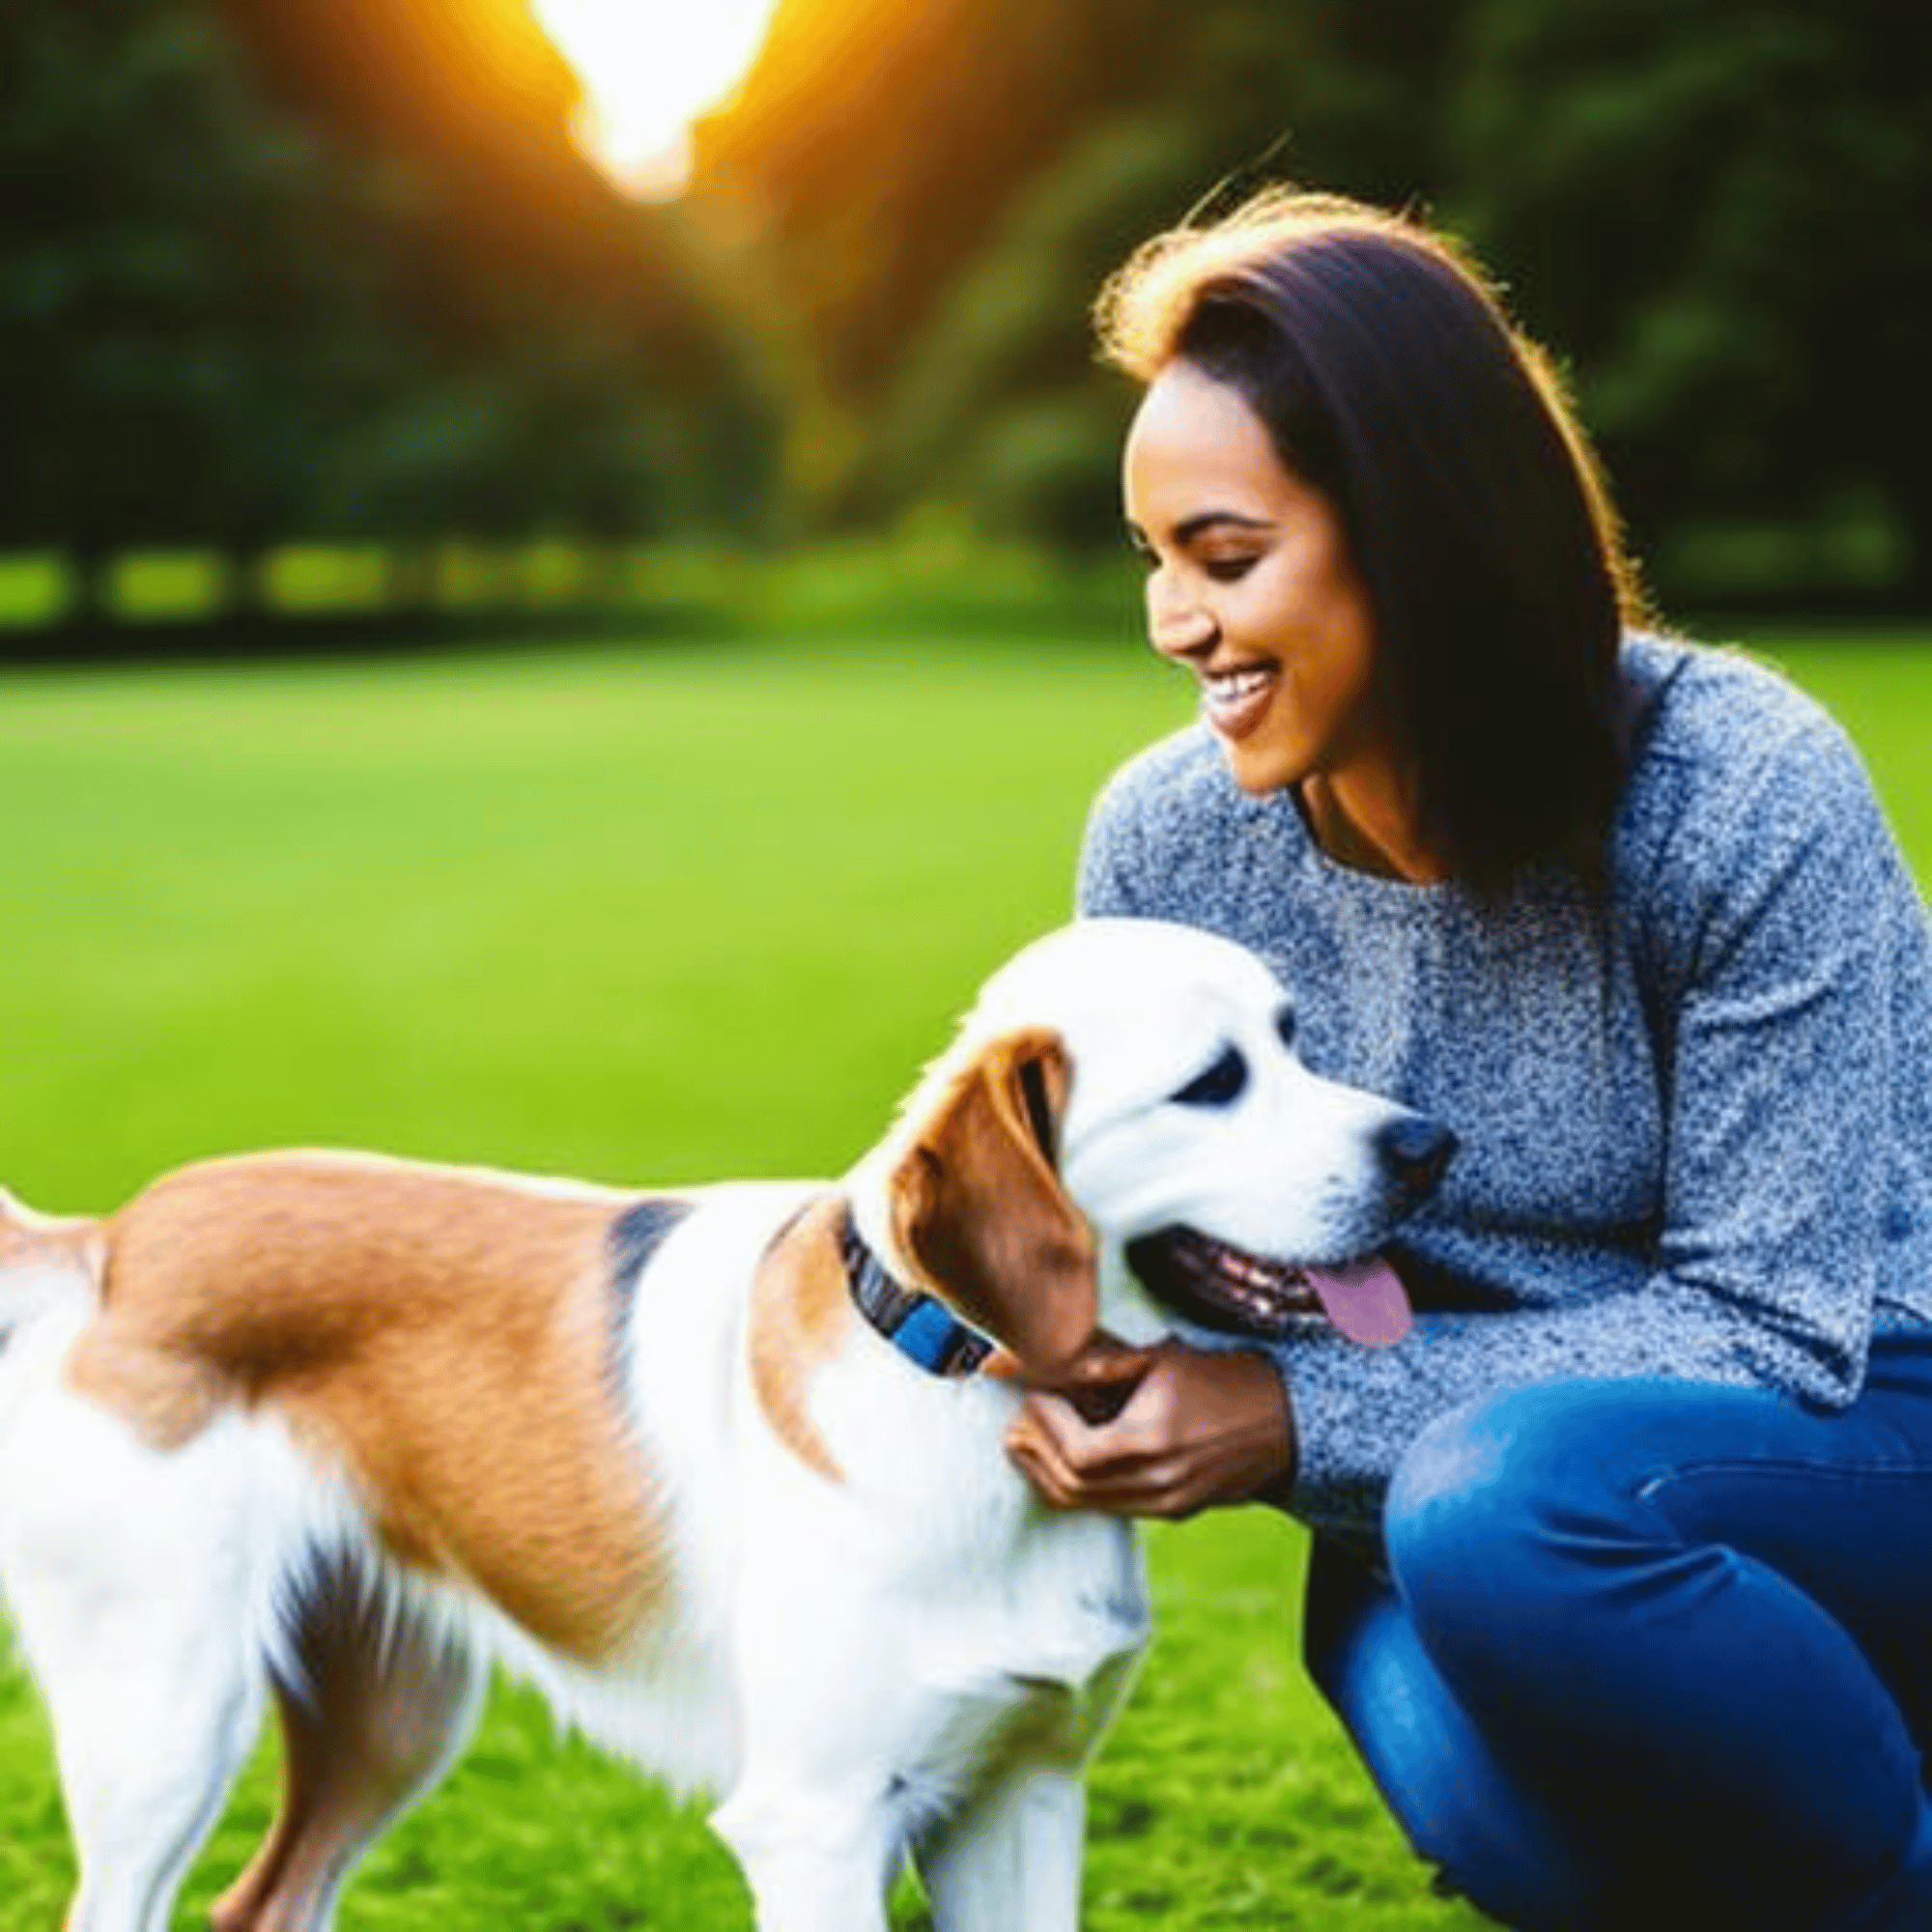 A smiling woman with a dog in a park, enjoying a walk together